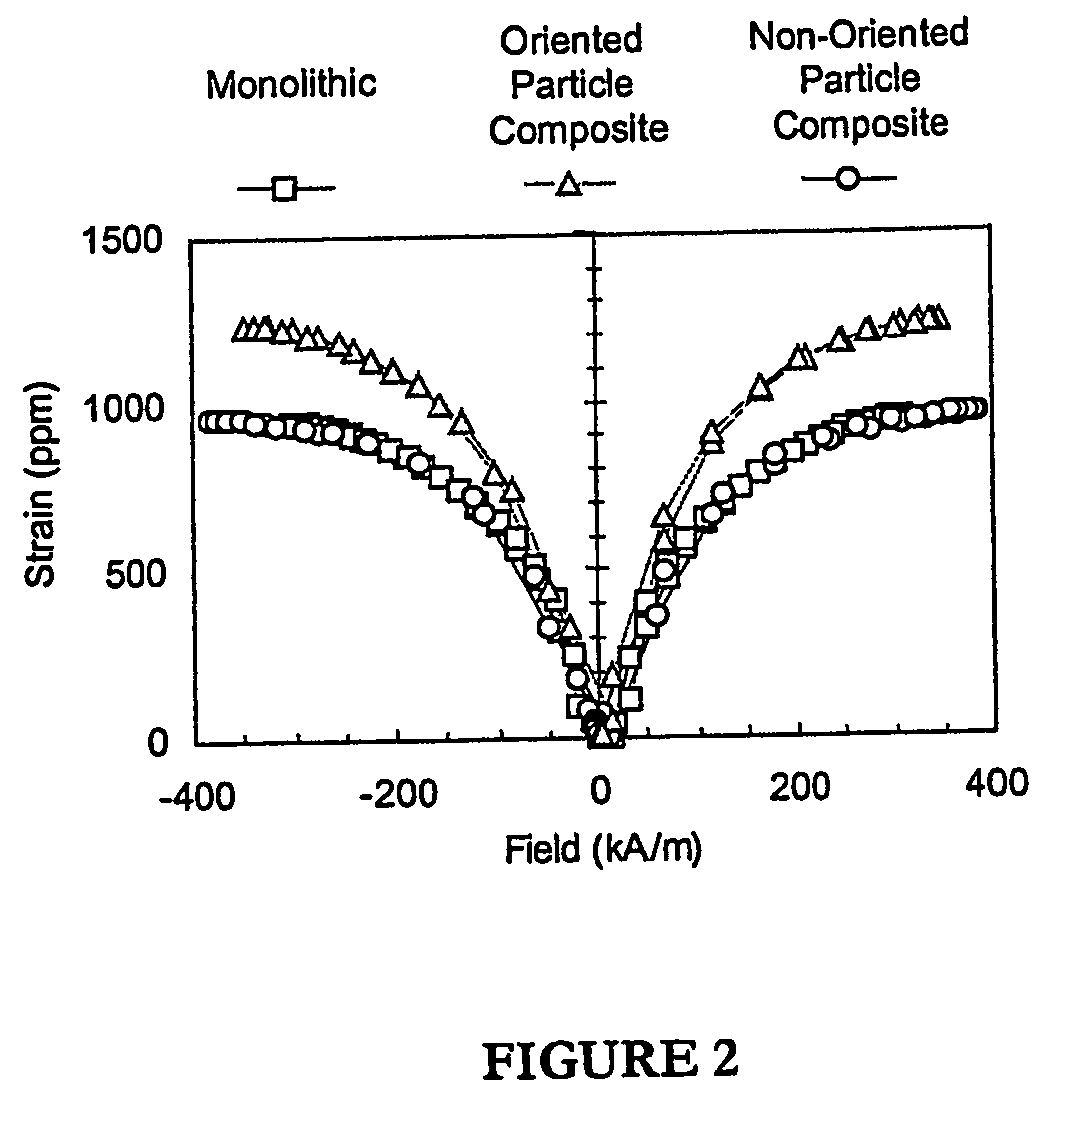 Directionally oriented particle composites